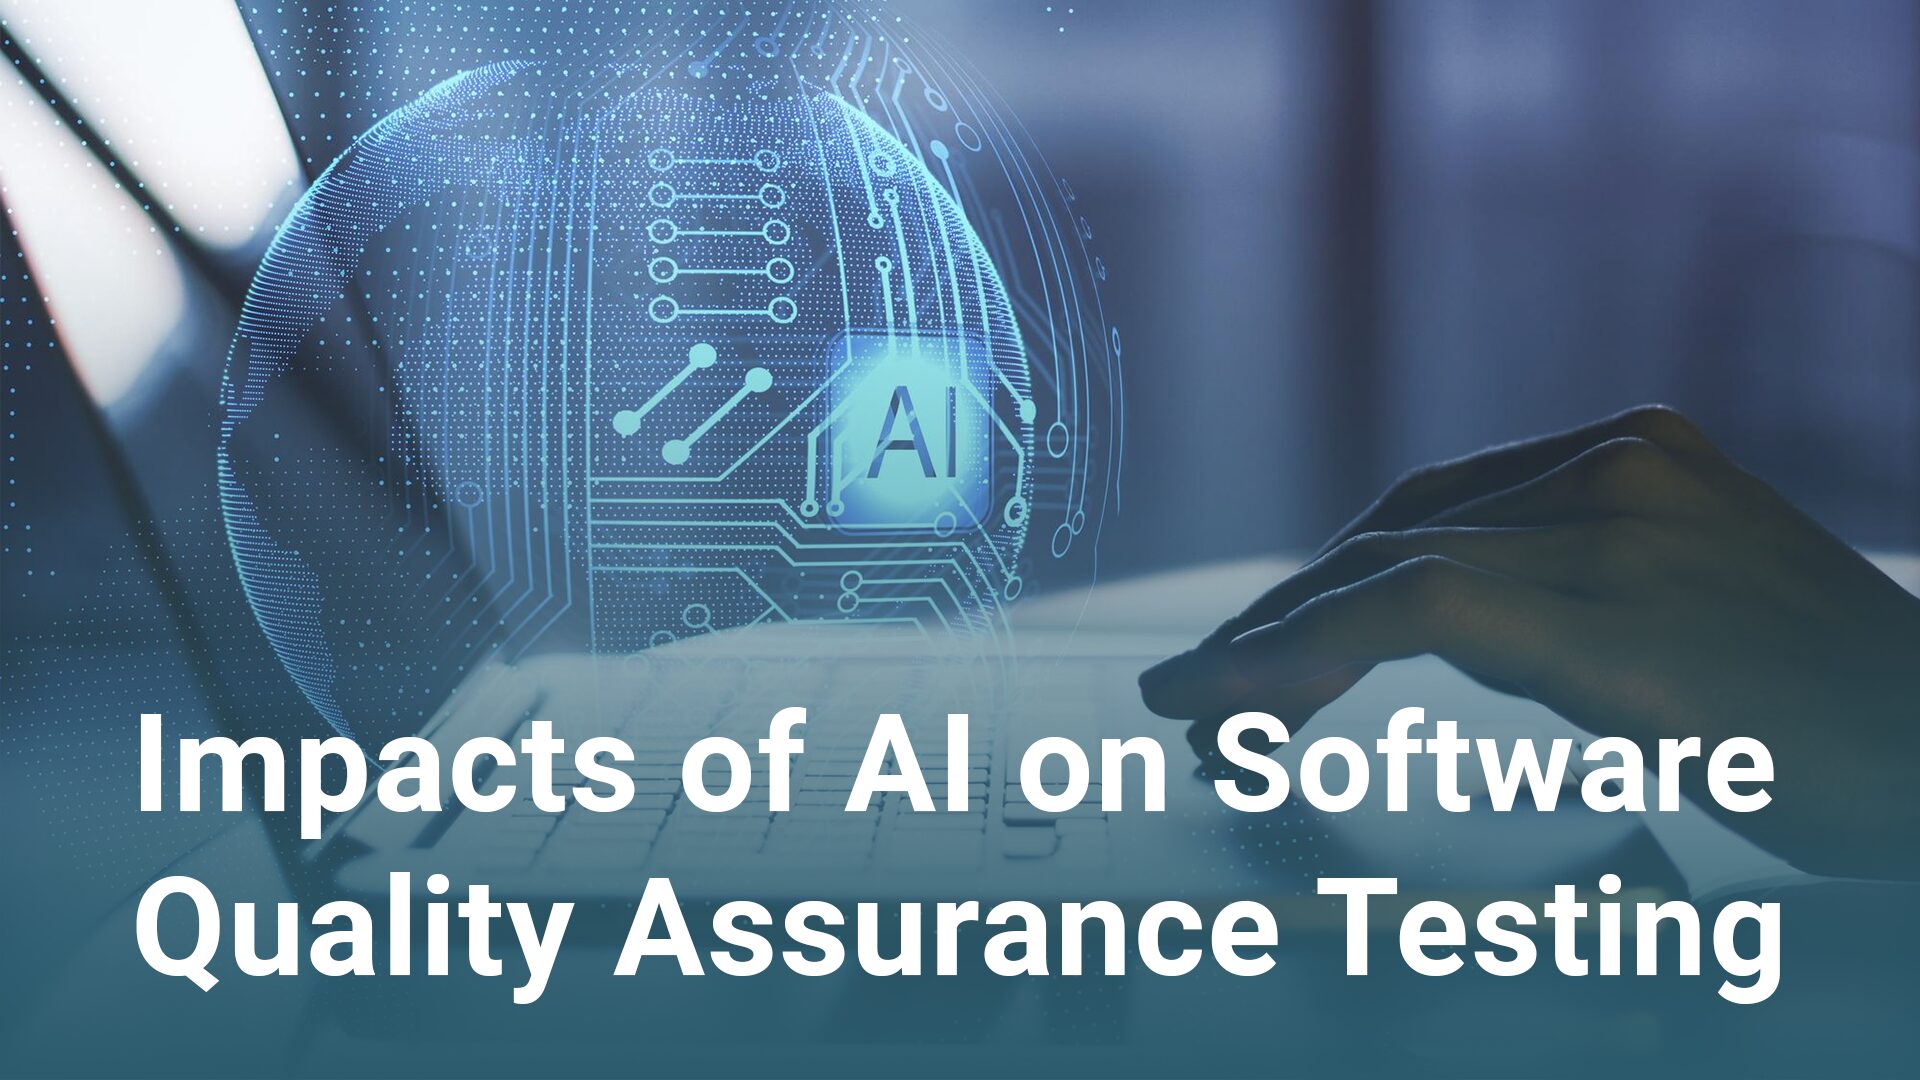 Impacts of AI on Software Quality Assurance Testing: Some Ramifications